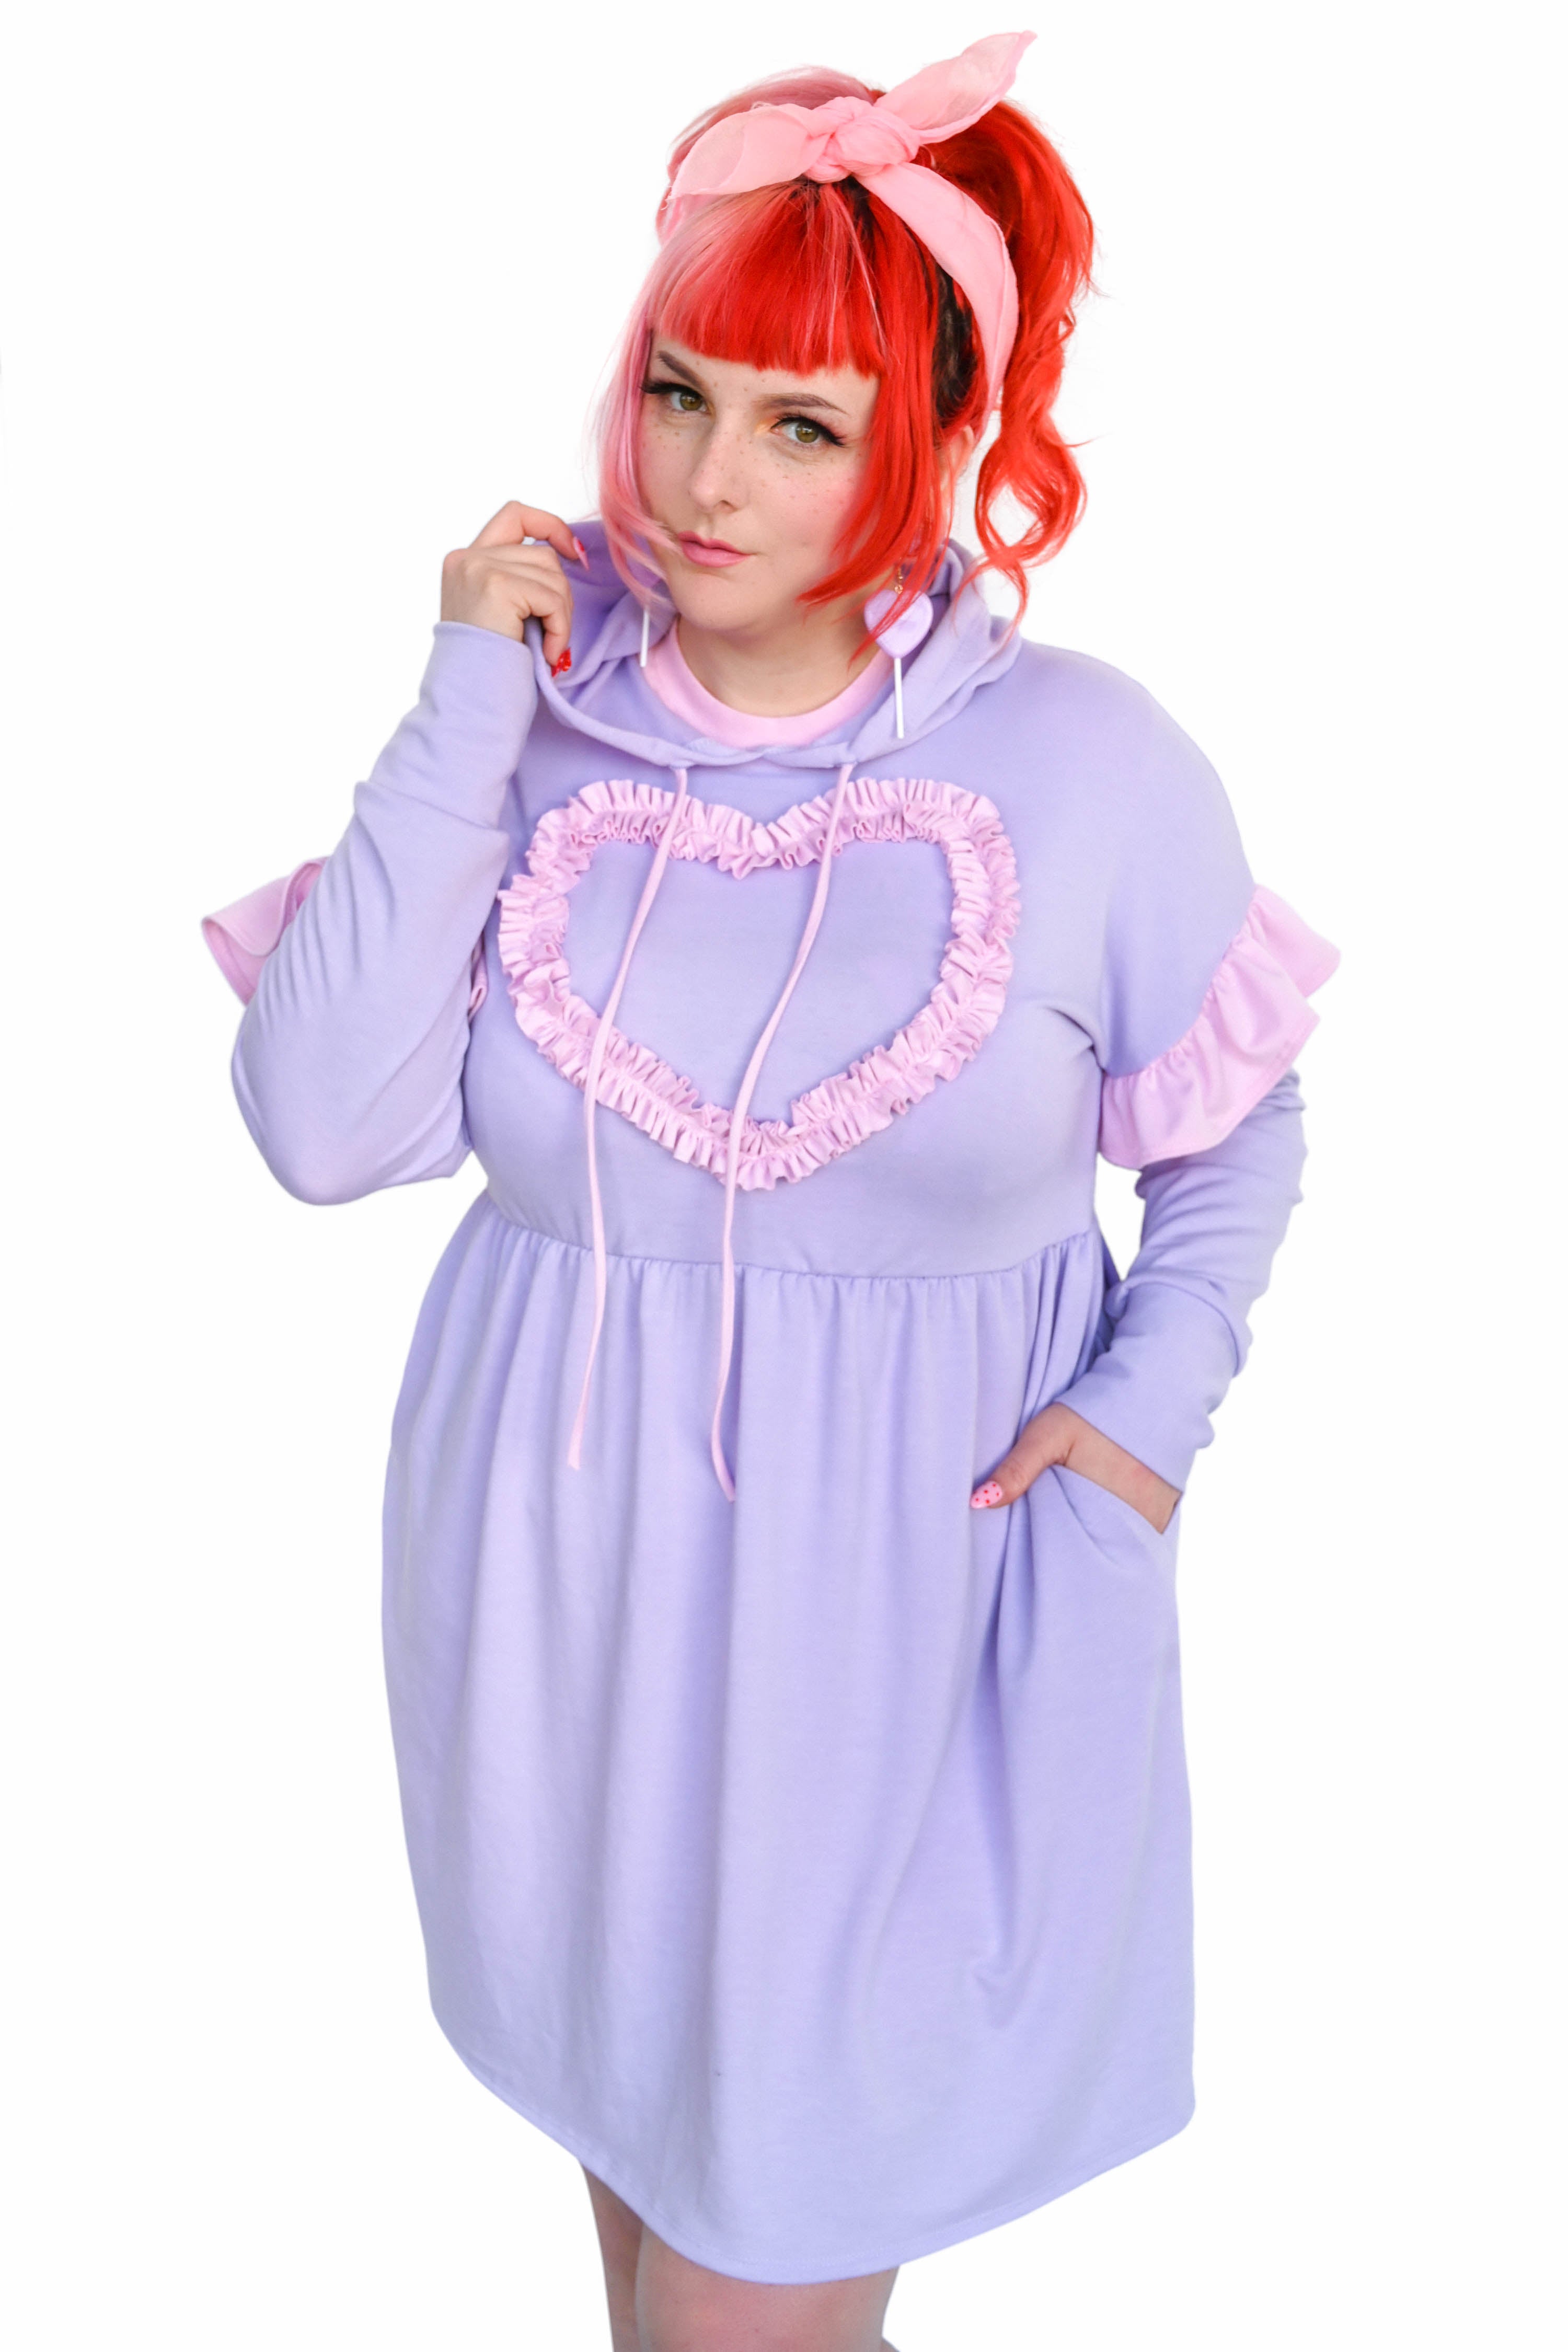 lavender hoodie dress with pink ruffle sleeves and heart chest ruffle "applique". Pink hoodie drawstrings